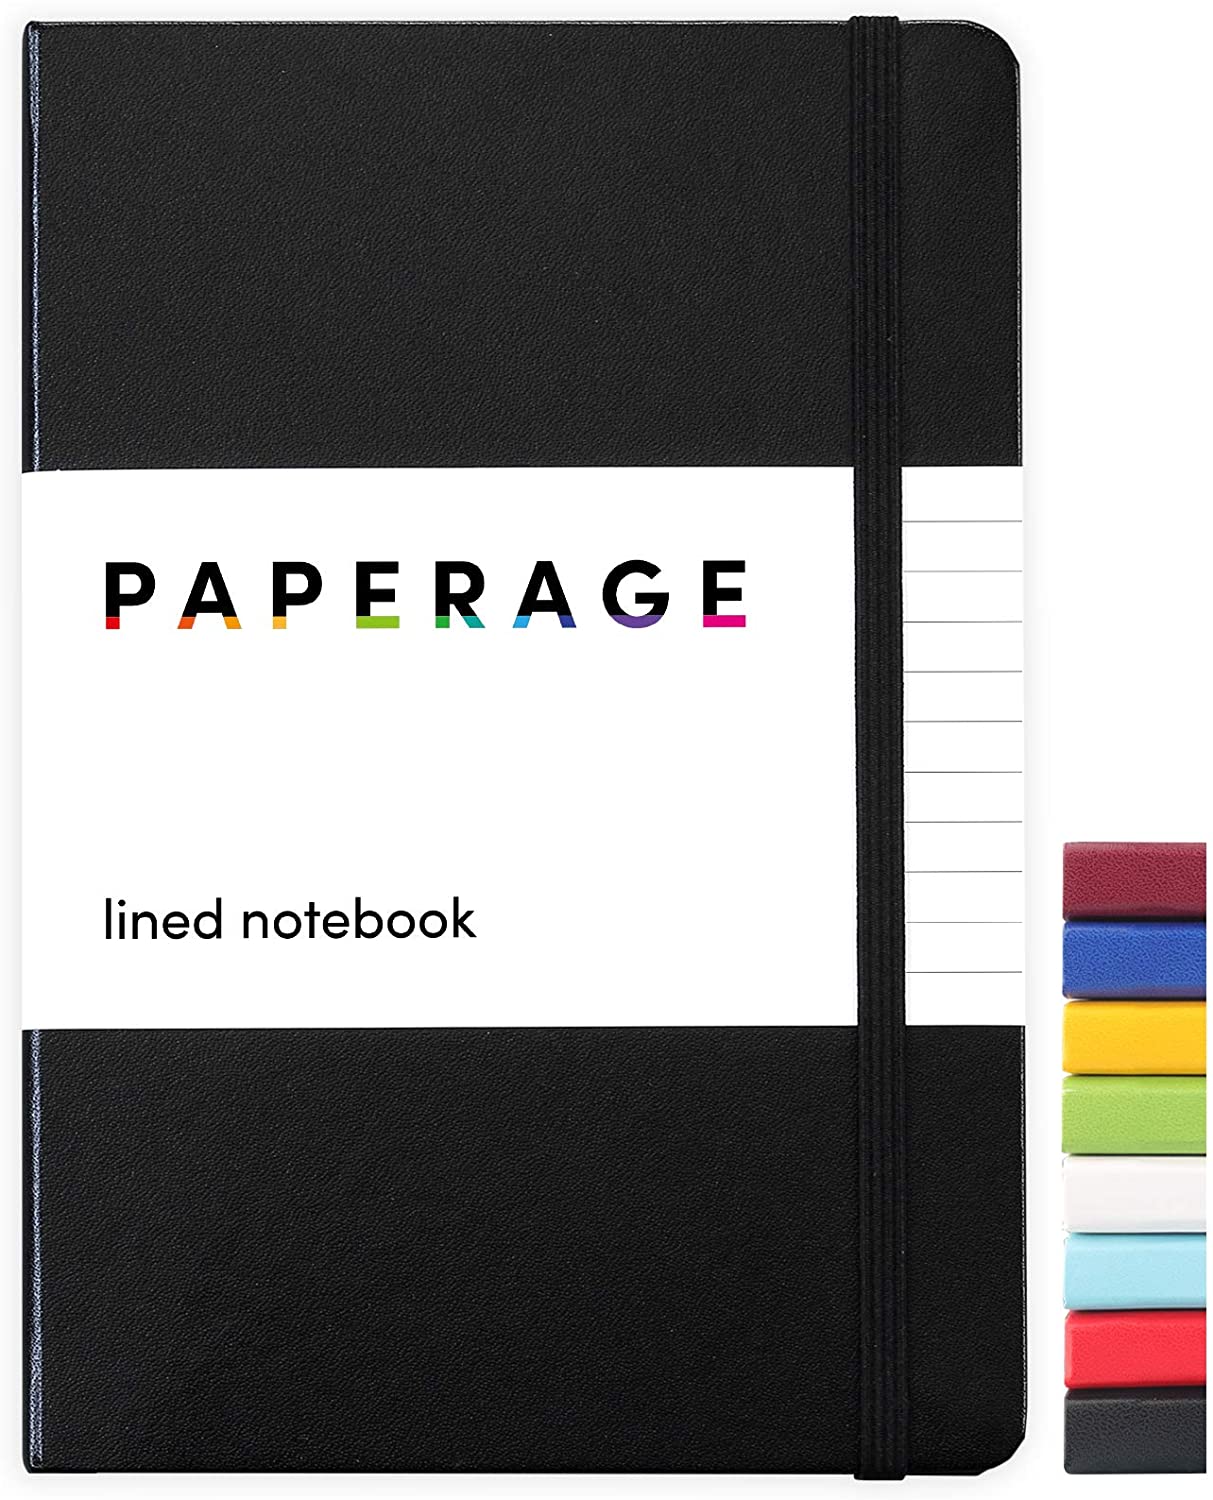 notebooks with thick paper